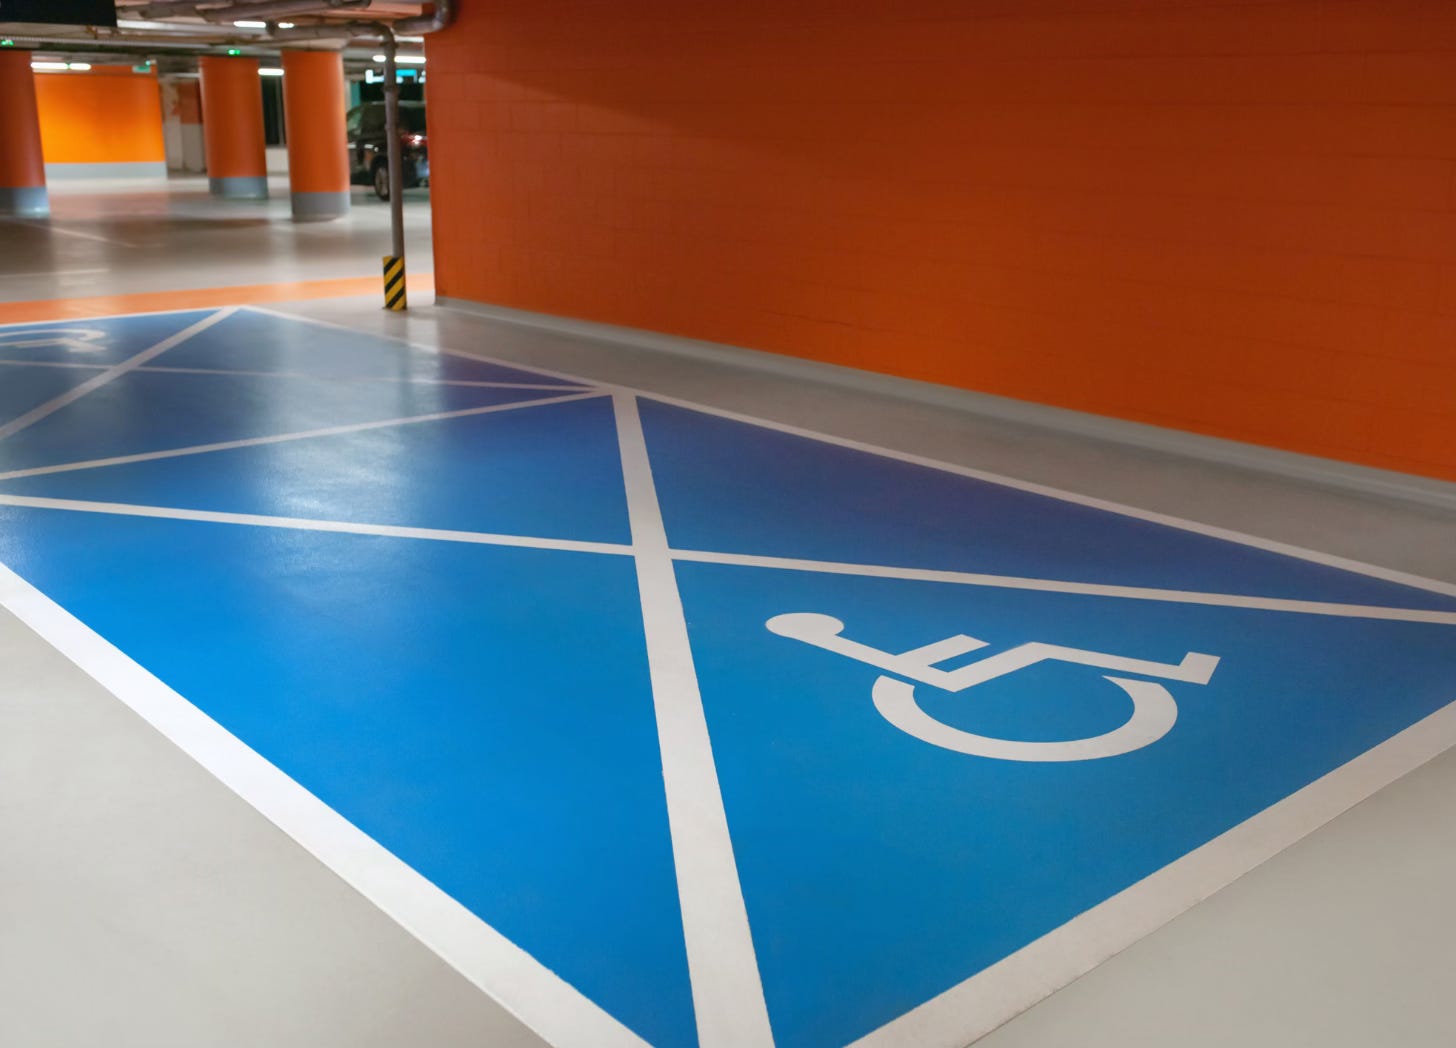 Wheelchair symbol painted on an indoor parking space